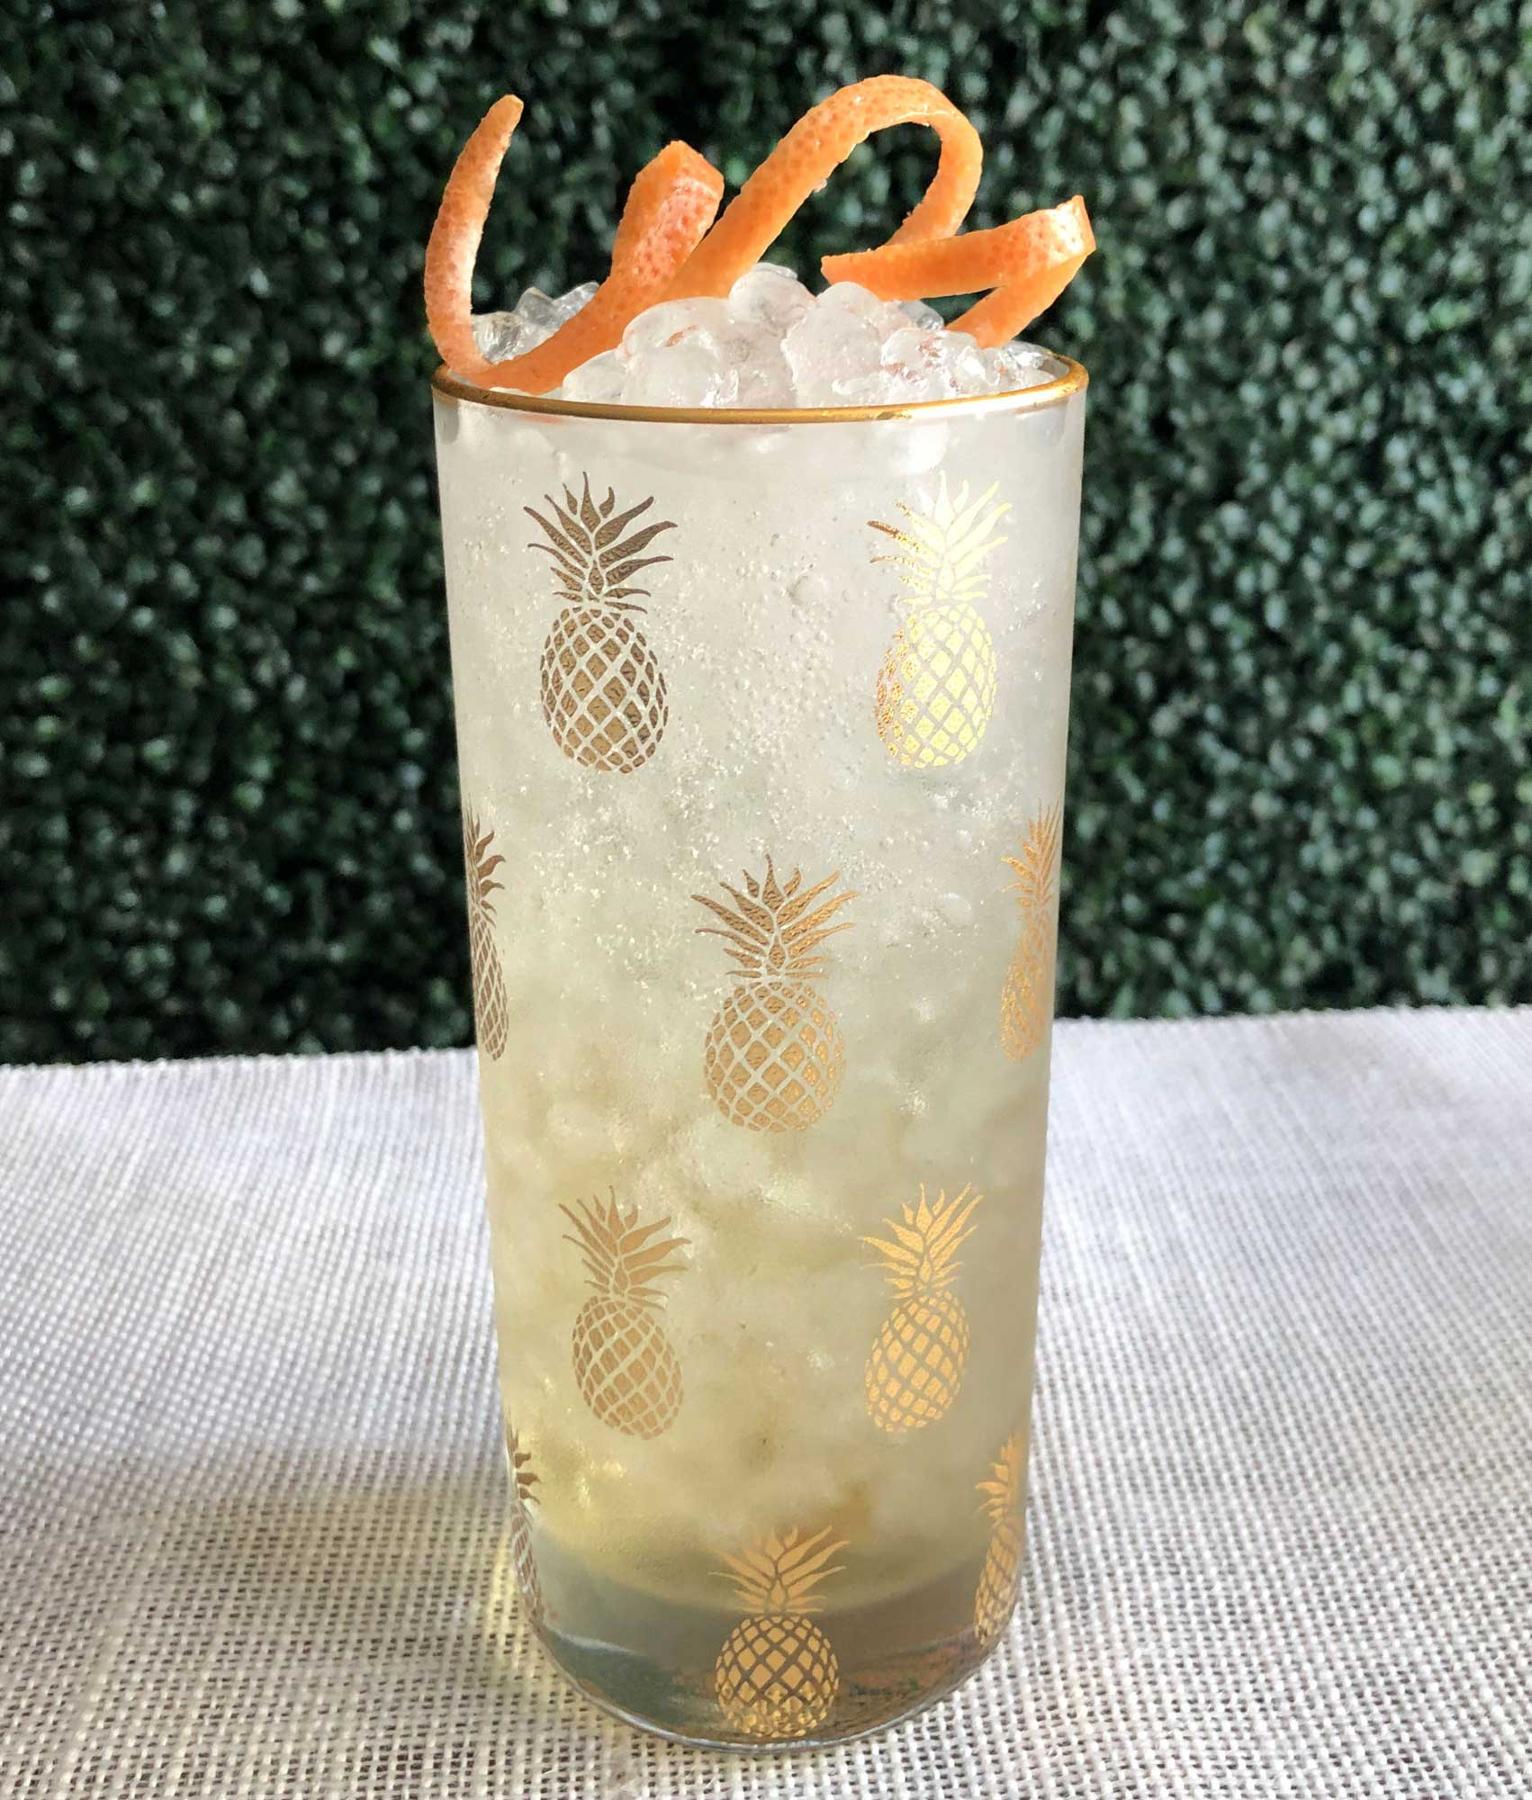 An example of the Proud and Prepared, the mixed drink (drink) featuring soda water, Comoz Blanc Vermouth de Chambèry, Mattei Cap Corse Blanc Quinquina, and grapefruit twist; photo by Lee Edwards